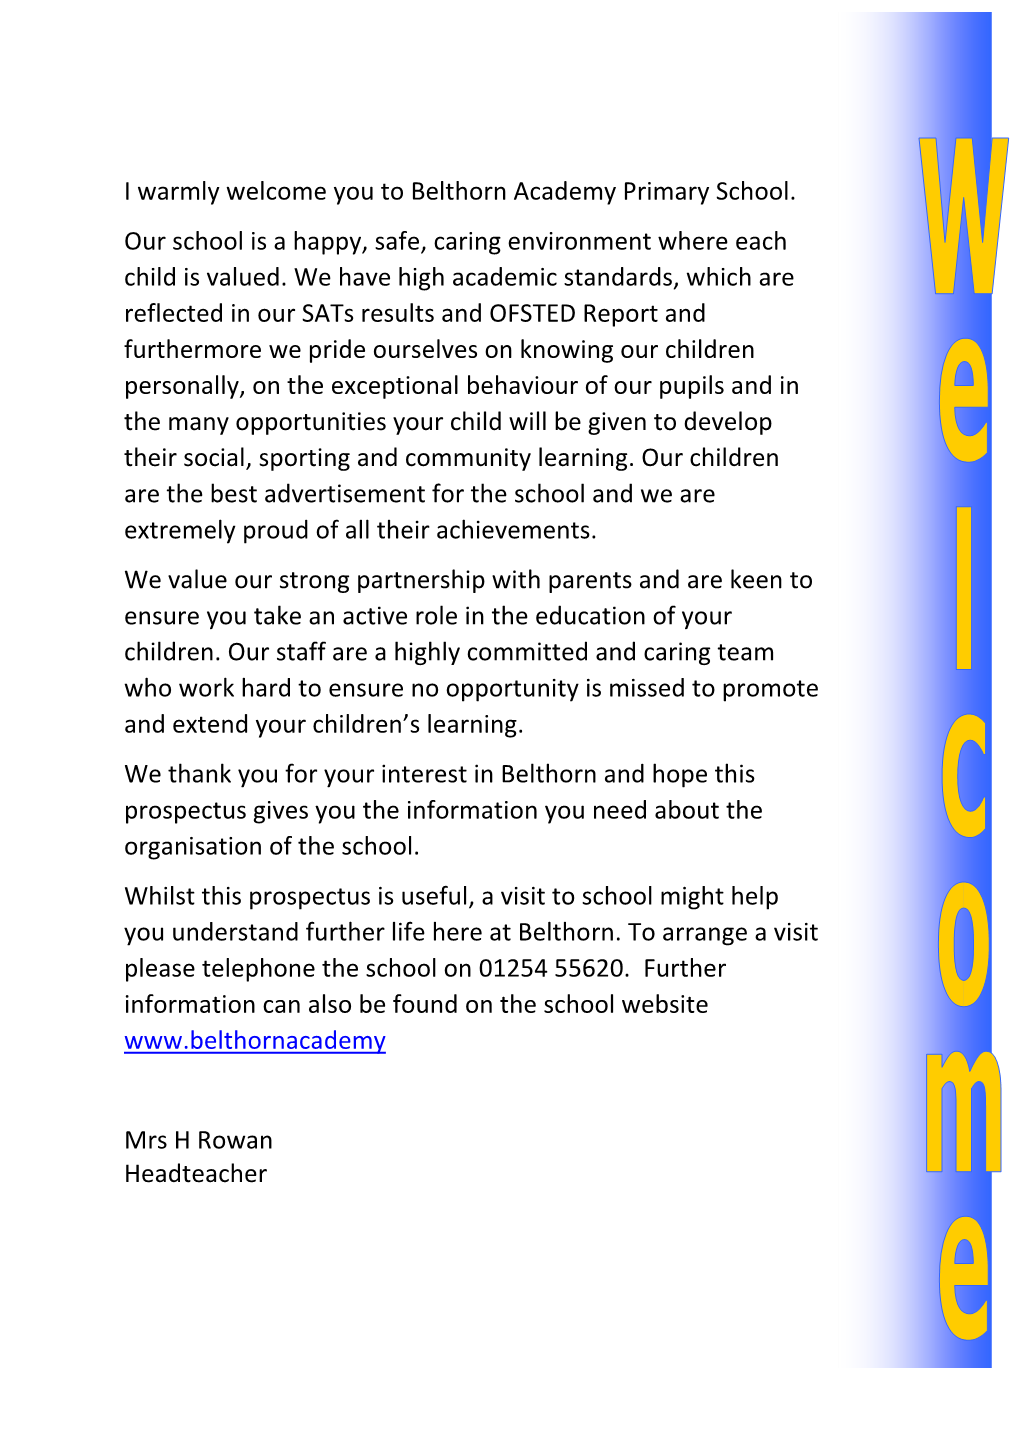 I Warmly Welcome You to Belthorn Academy Primary School. Our School Is a Happy, Safe, Caring Environment Where Each Child Is Valued